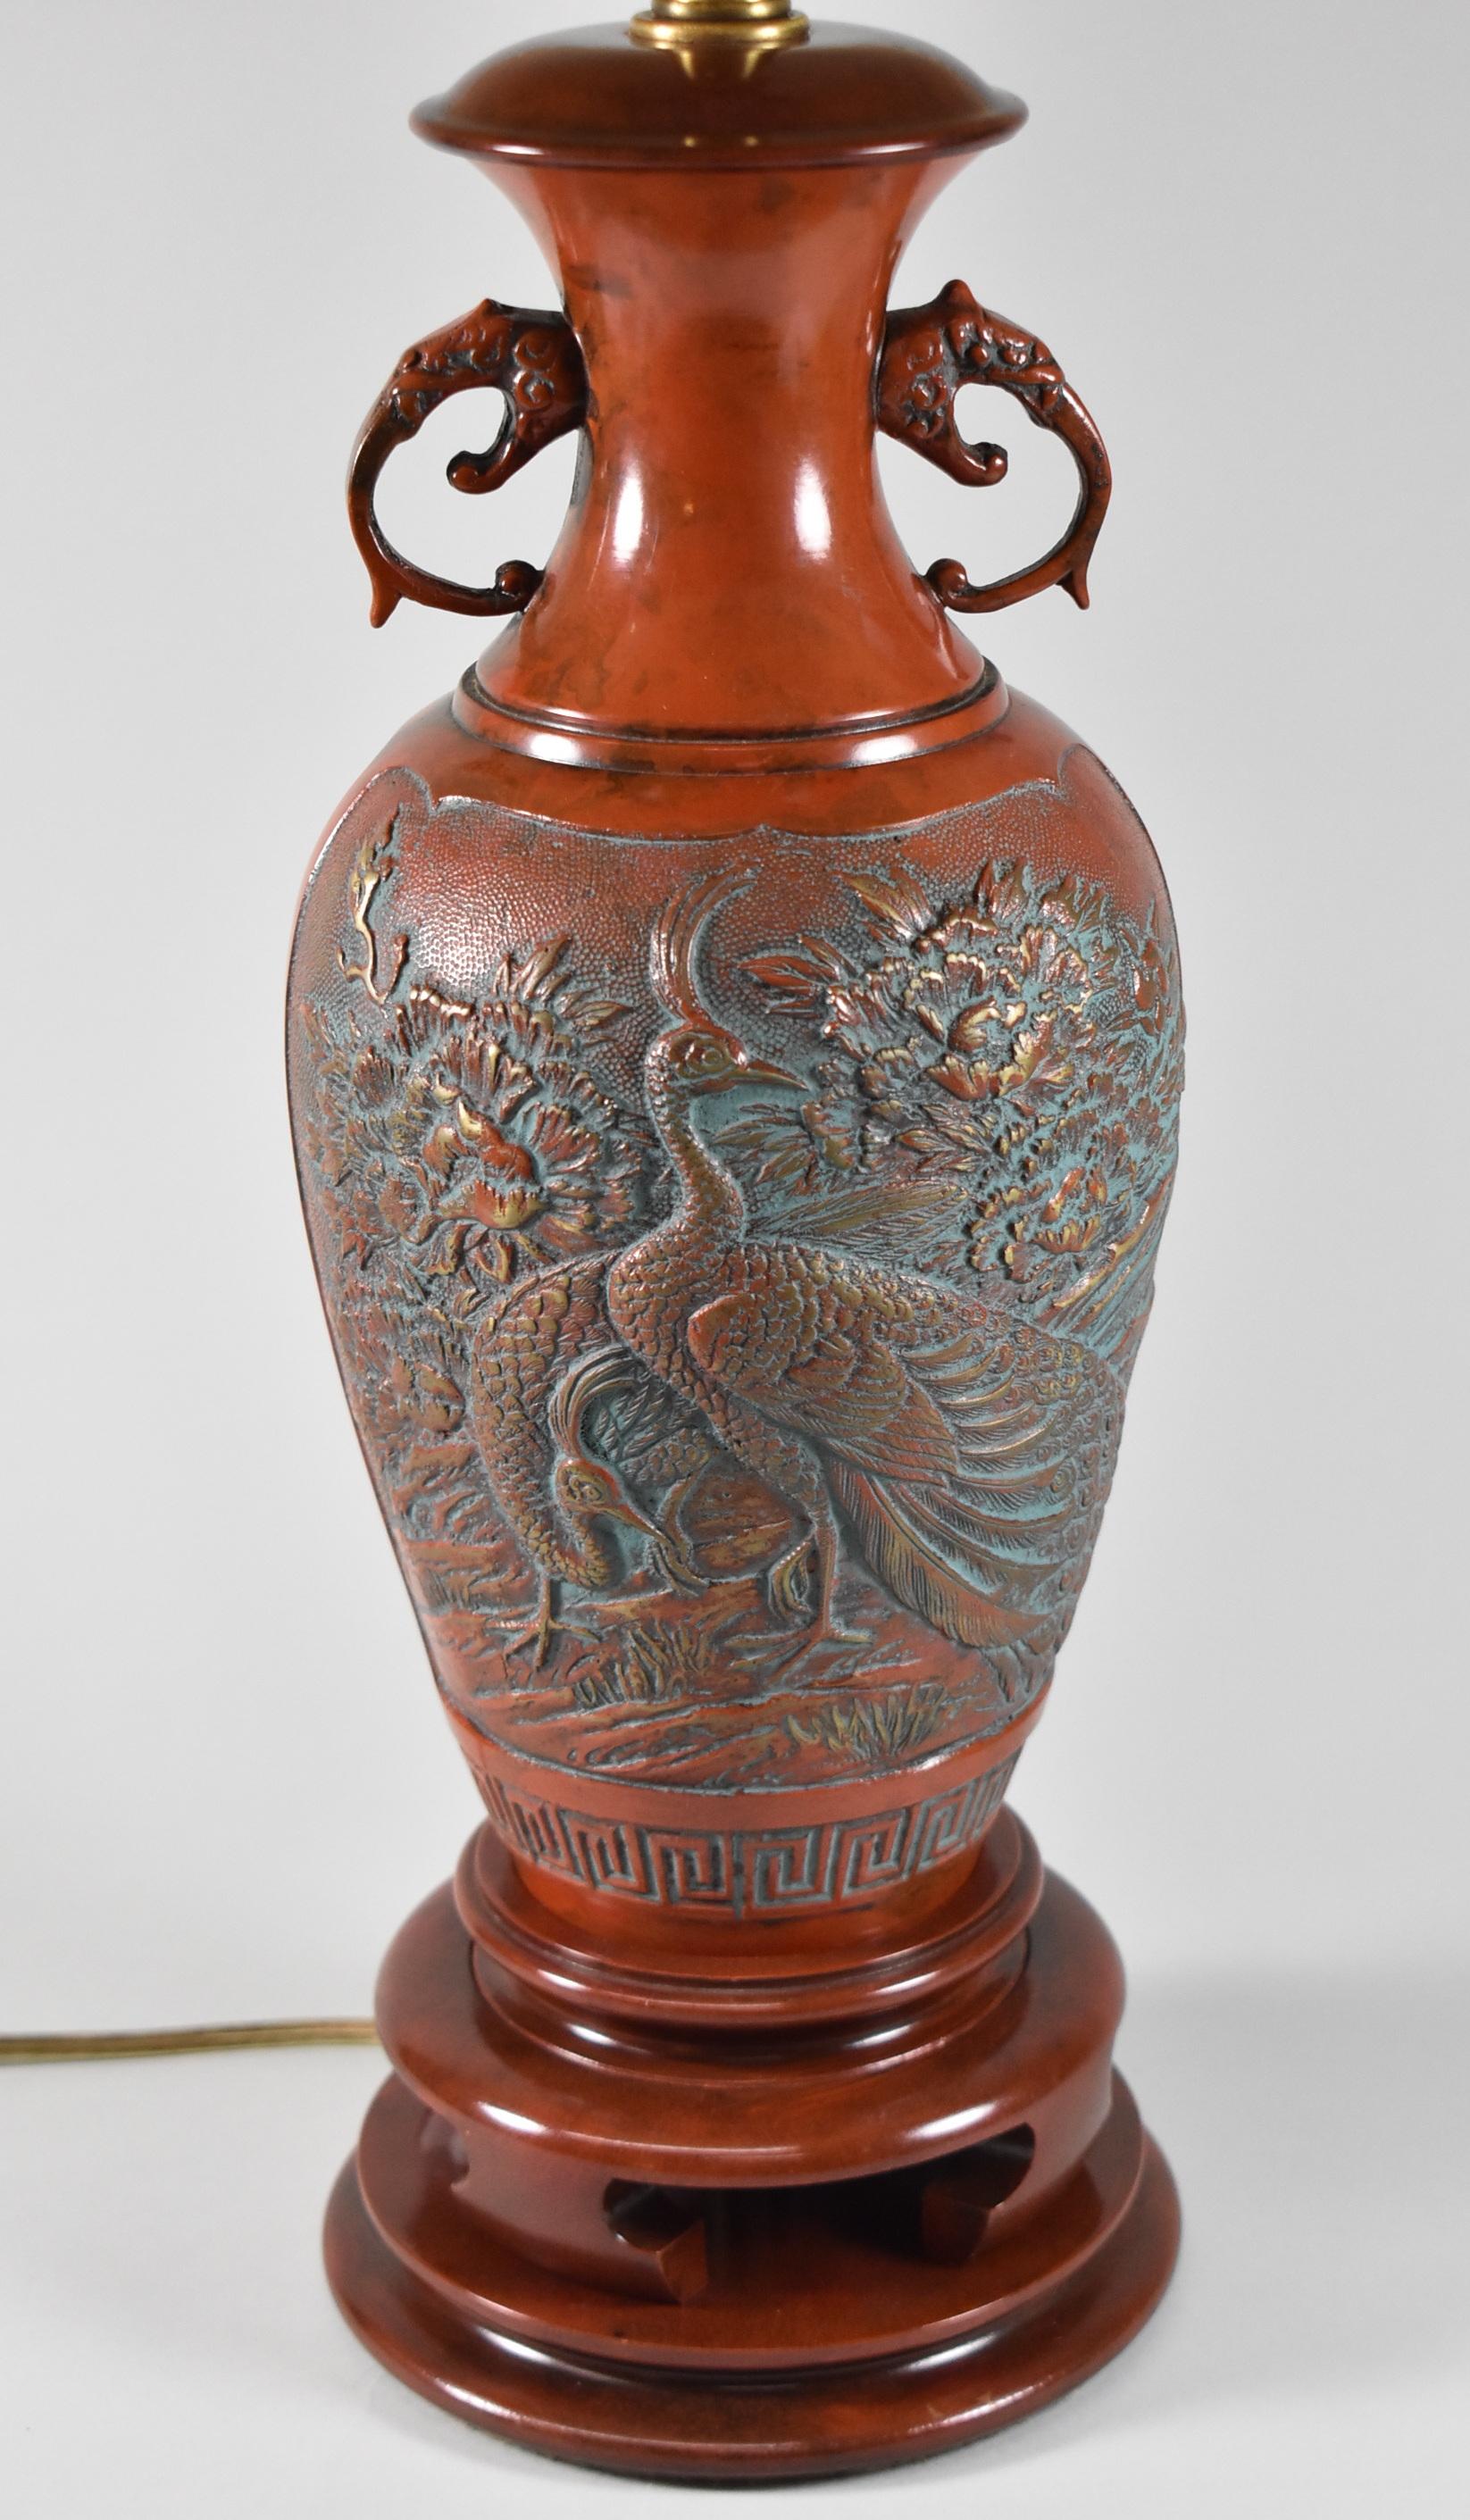 Marbro lamp with carved Asian designs of peacocks and foliage. Original finish. Good wiring. Shade is not included.